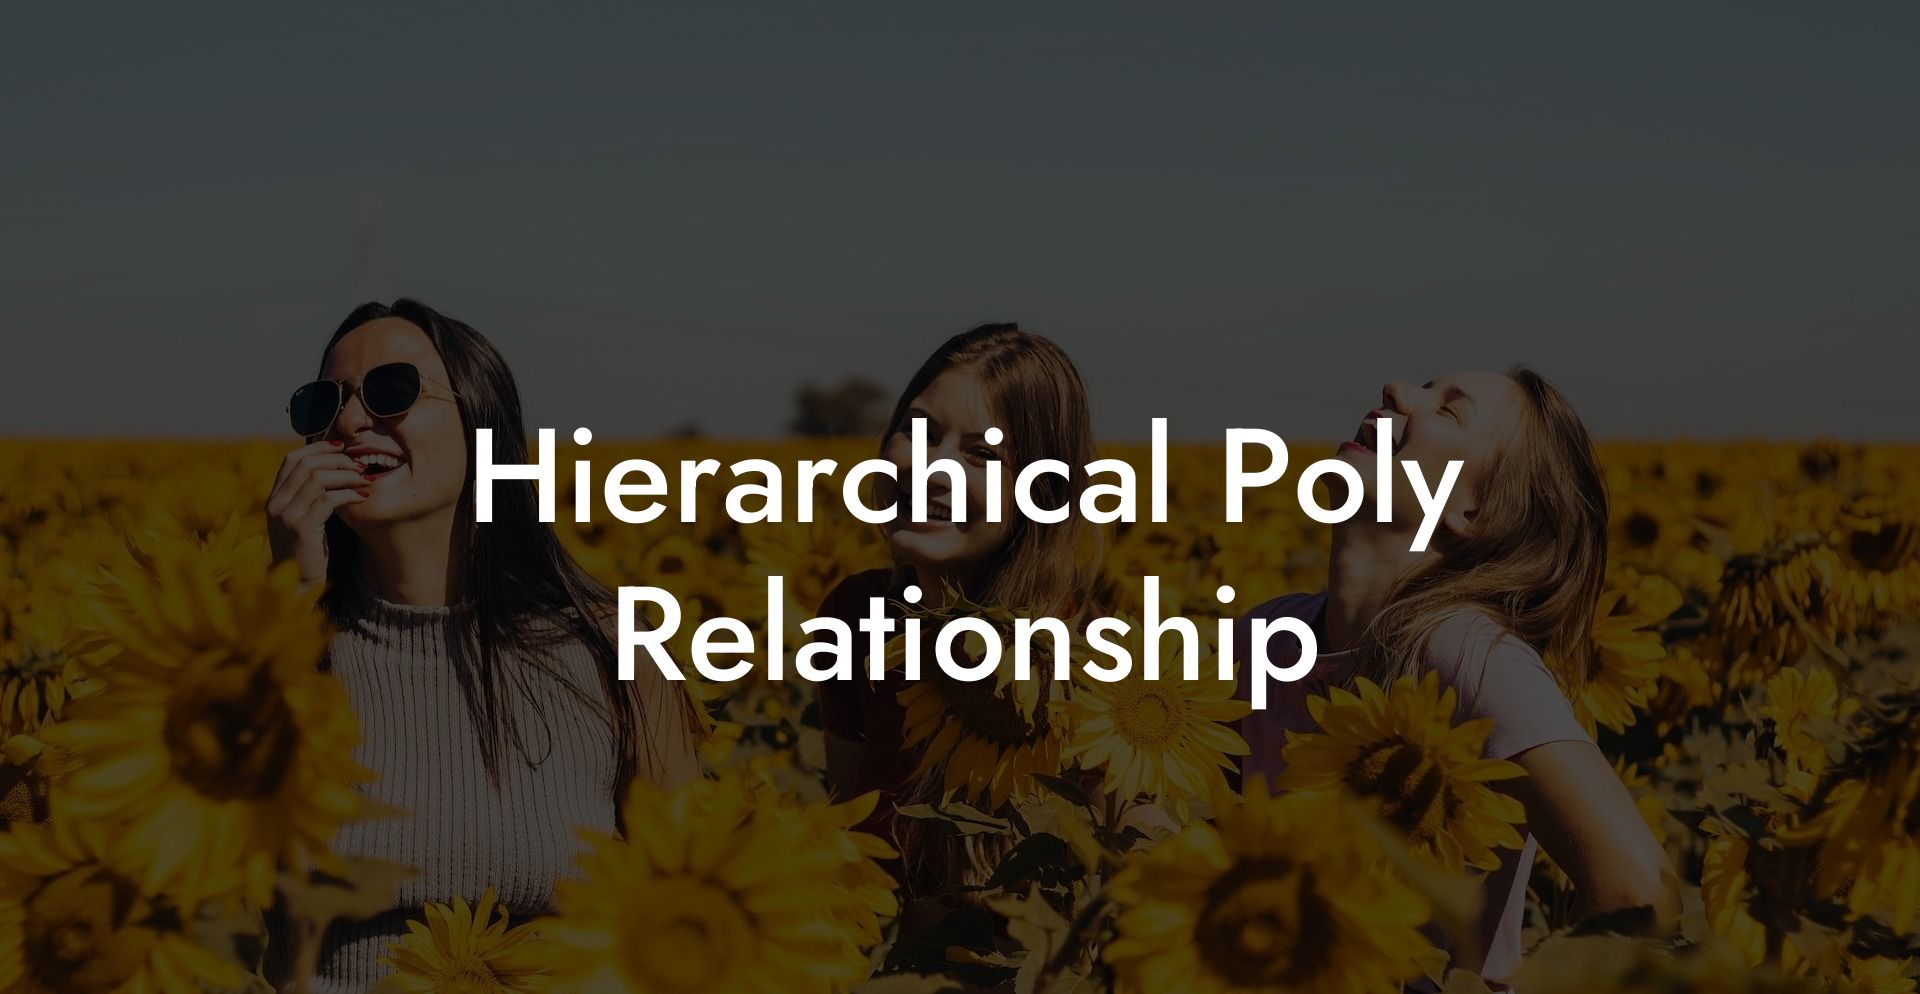 Hierarchical Poly Relationship